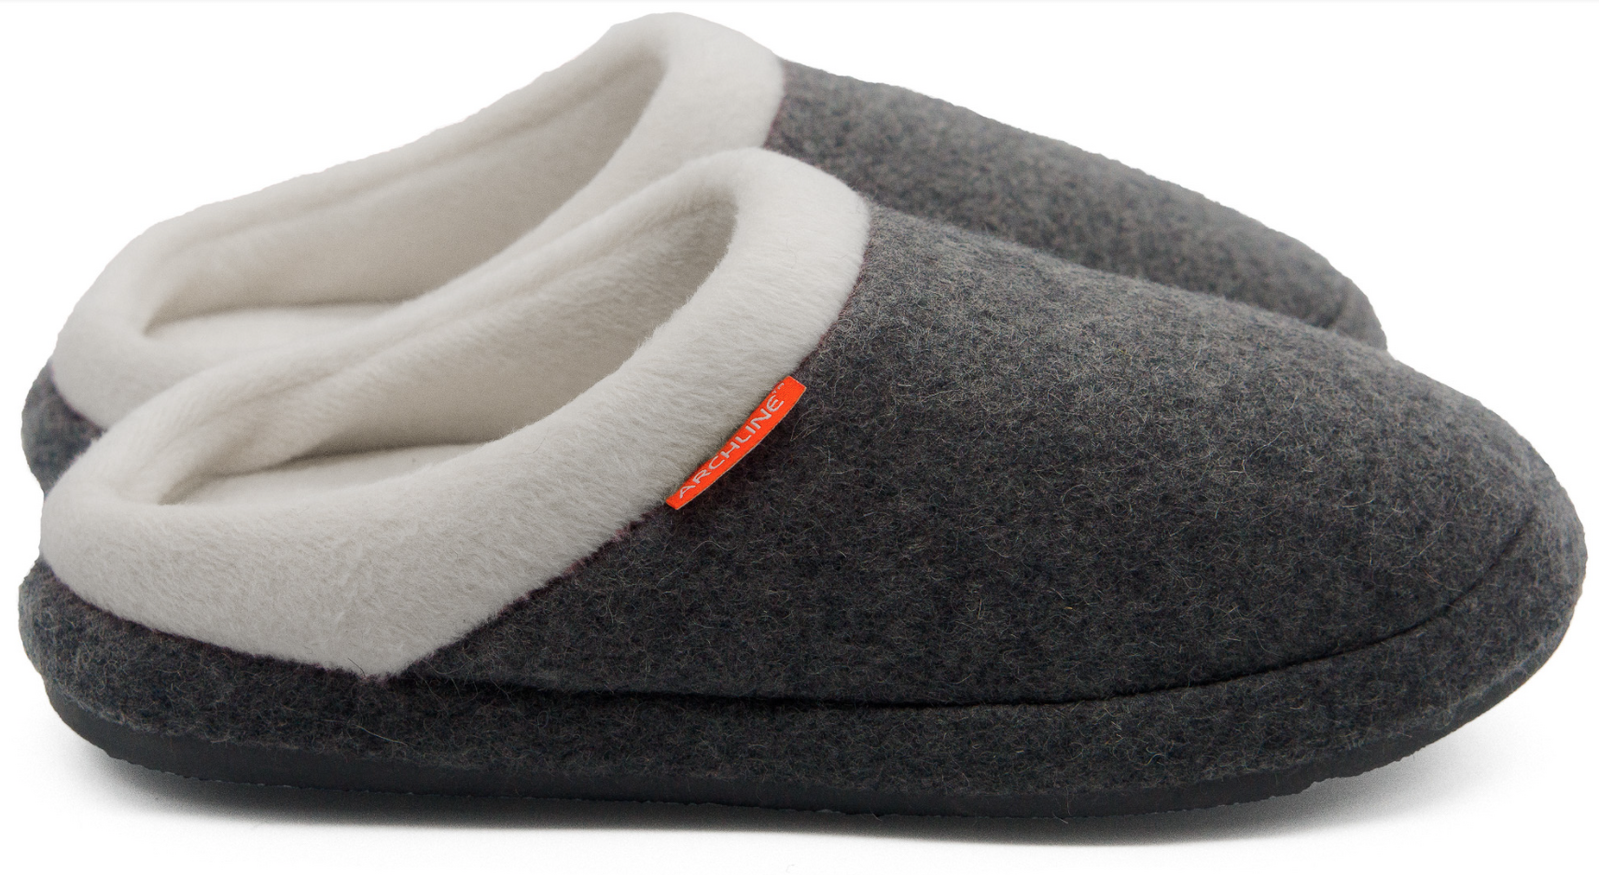 Orthotic Slippers Slip On Arch Scuffs Orthopedic Moccasins - Grey Marle - EUR 41